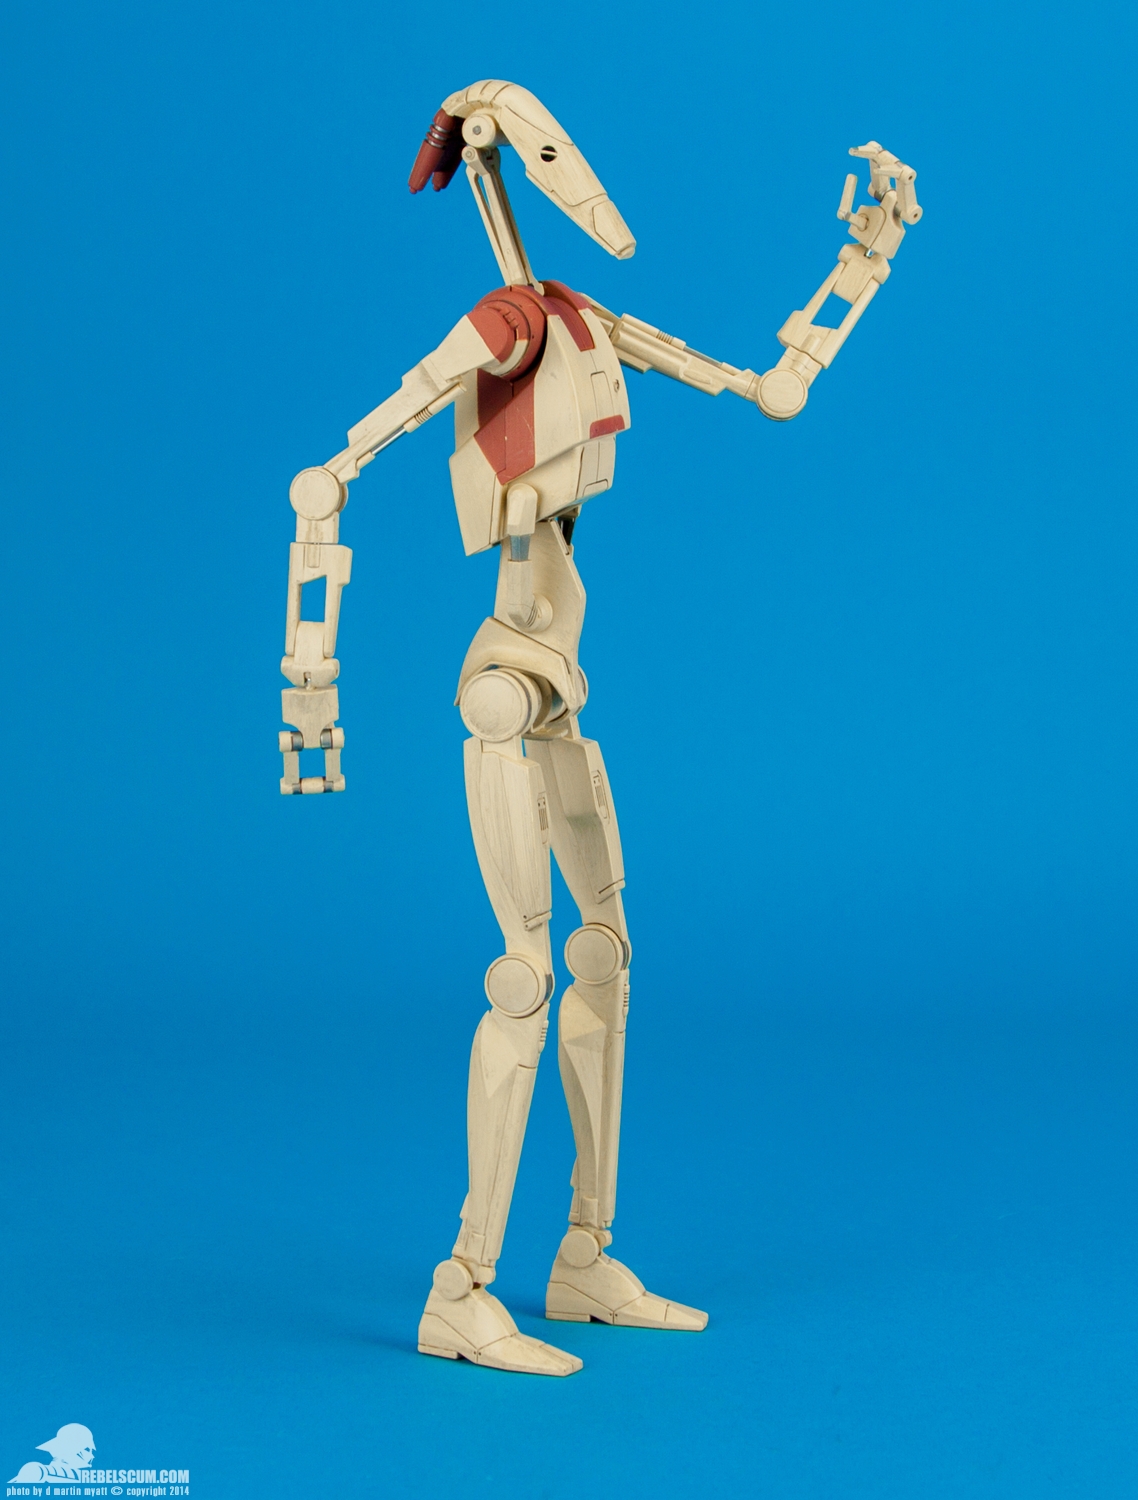 Security-Droids-Sixth-Scale-Sideshow-Collectibles-006.jpg